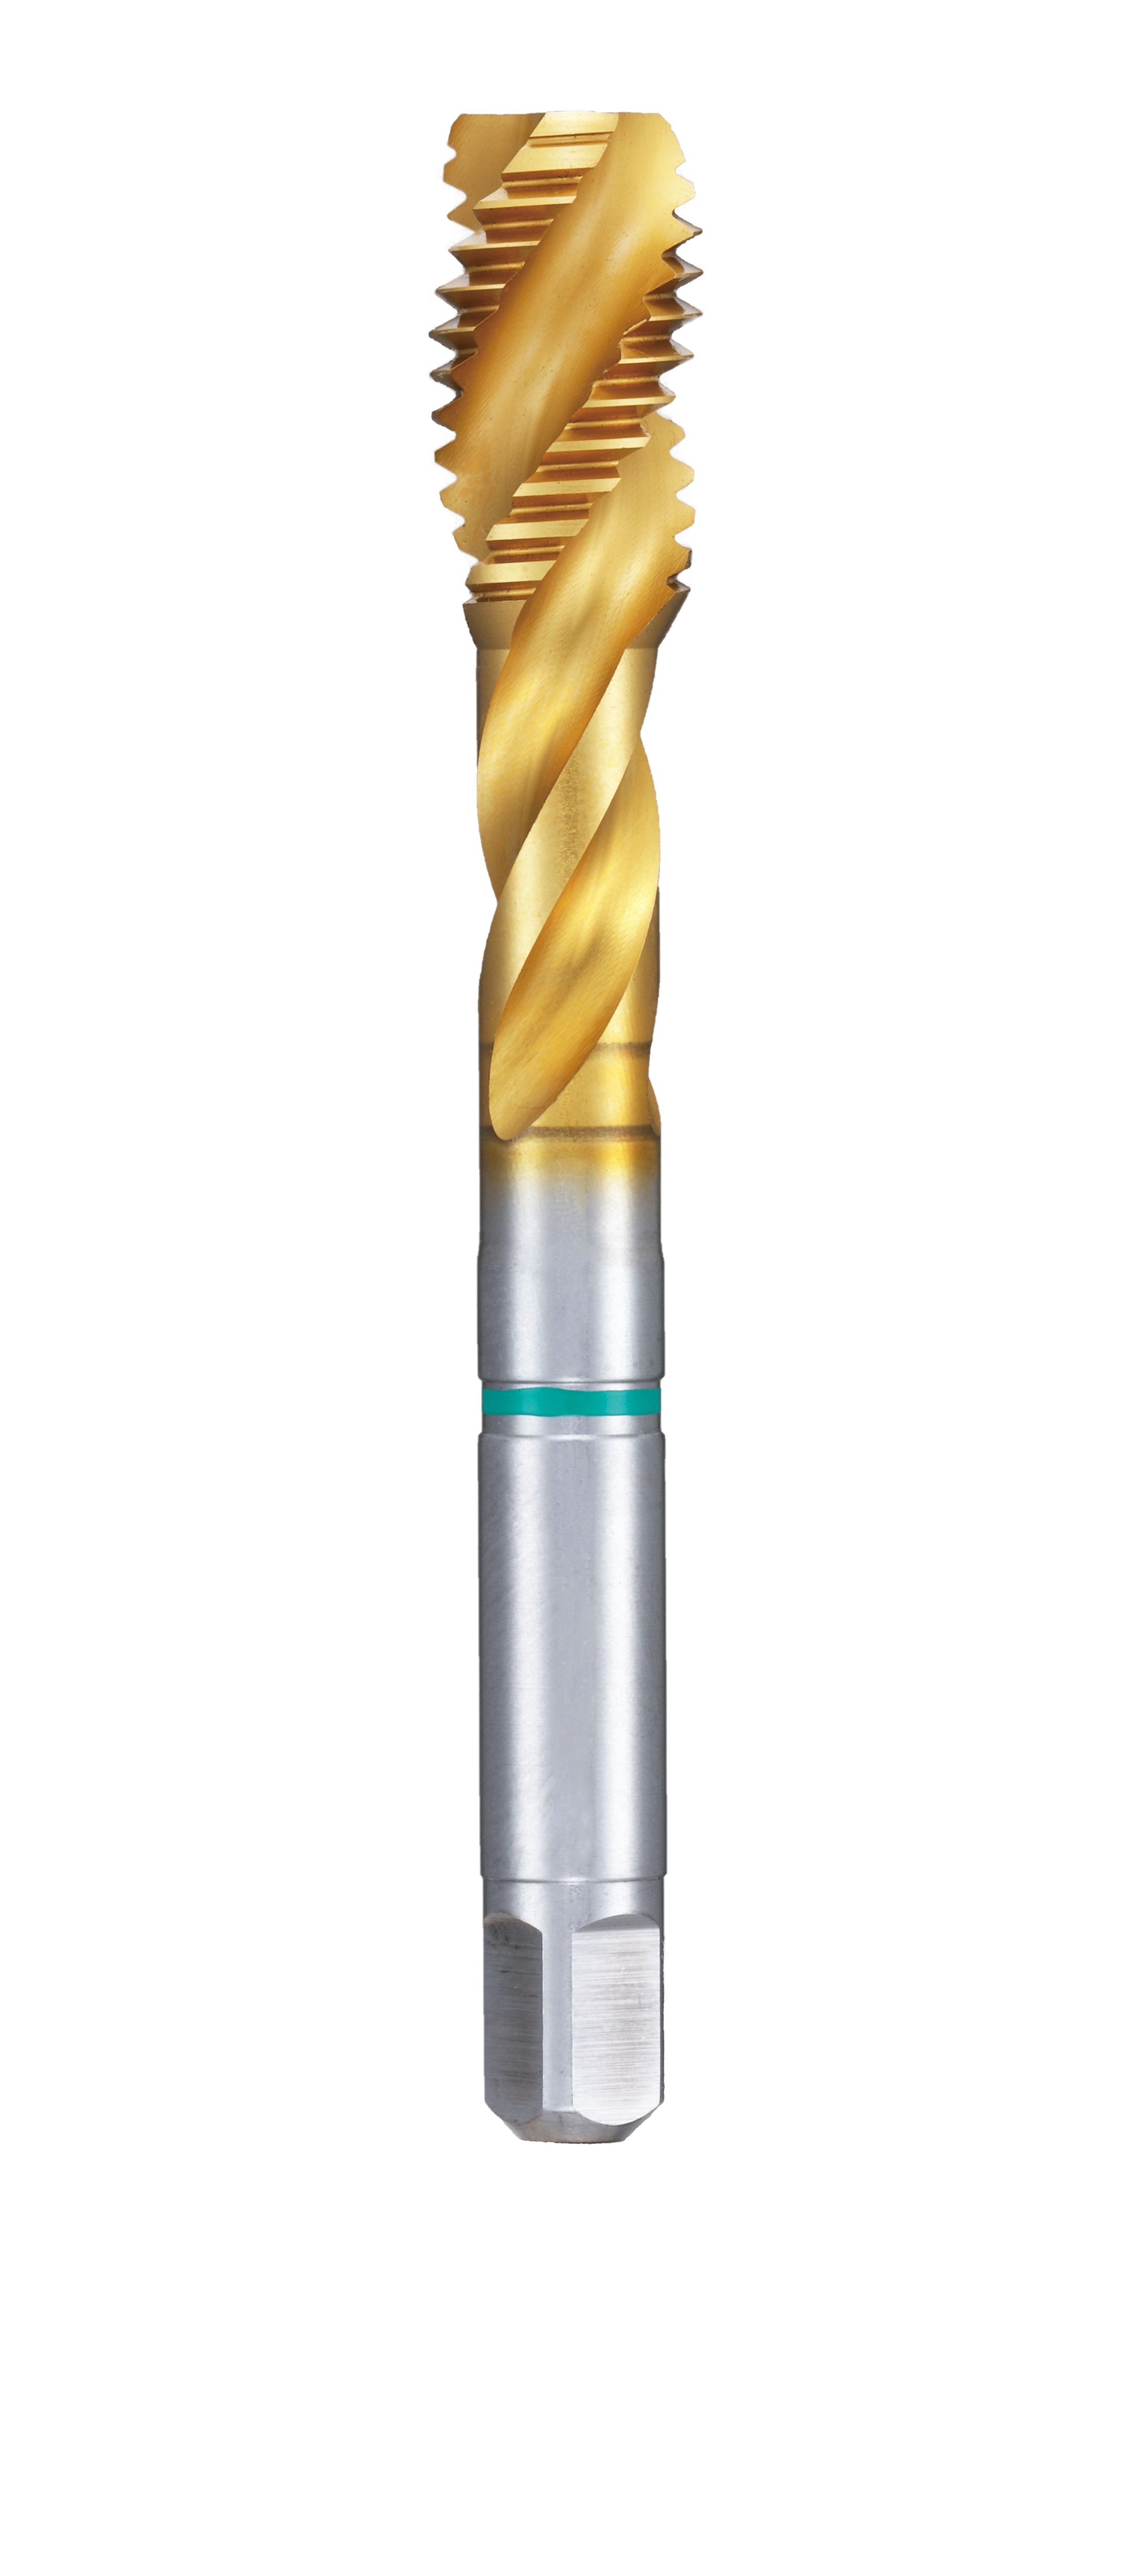 Spiral Tap for Blind Hole 1013 (1013-M14.0X2.0) 